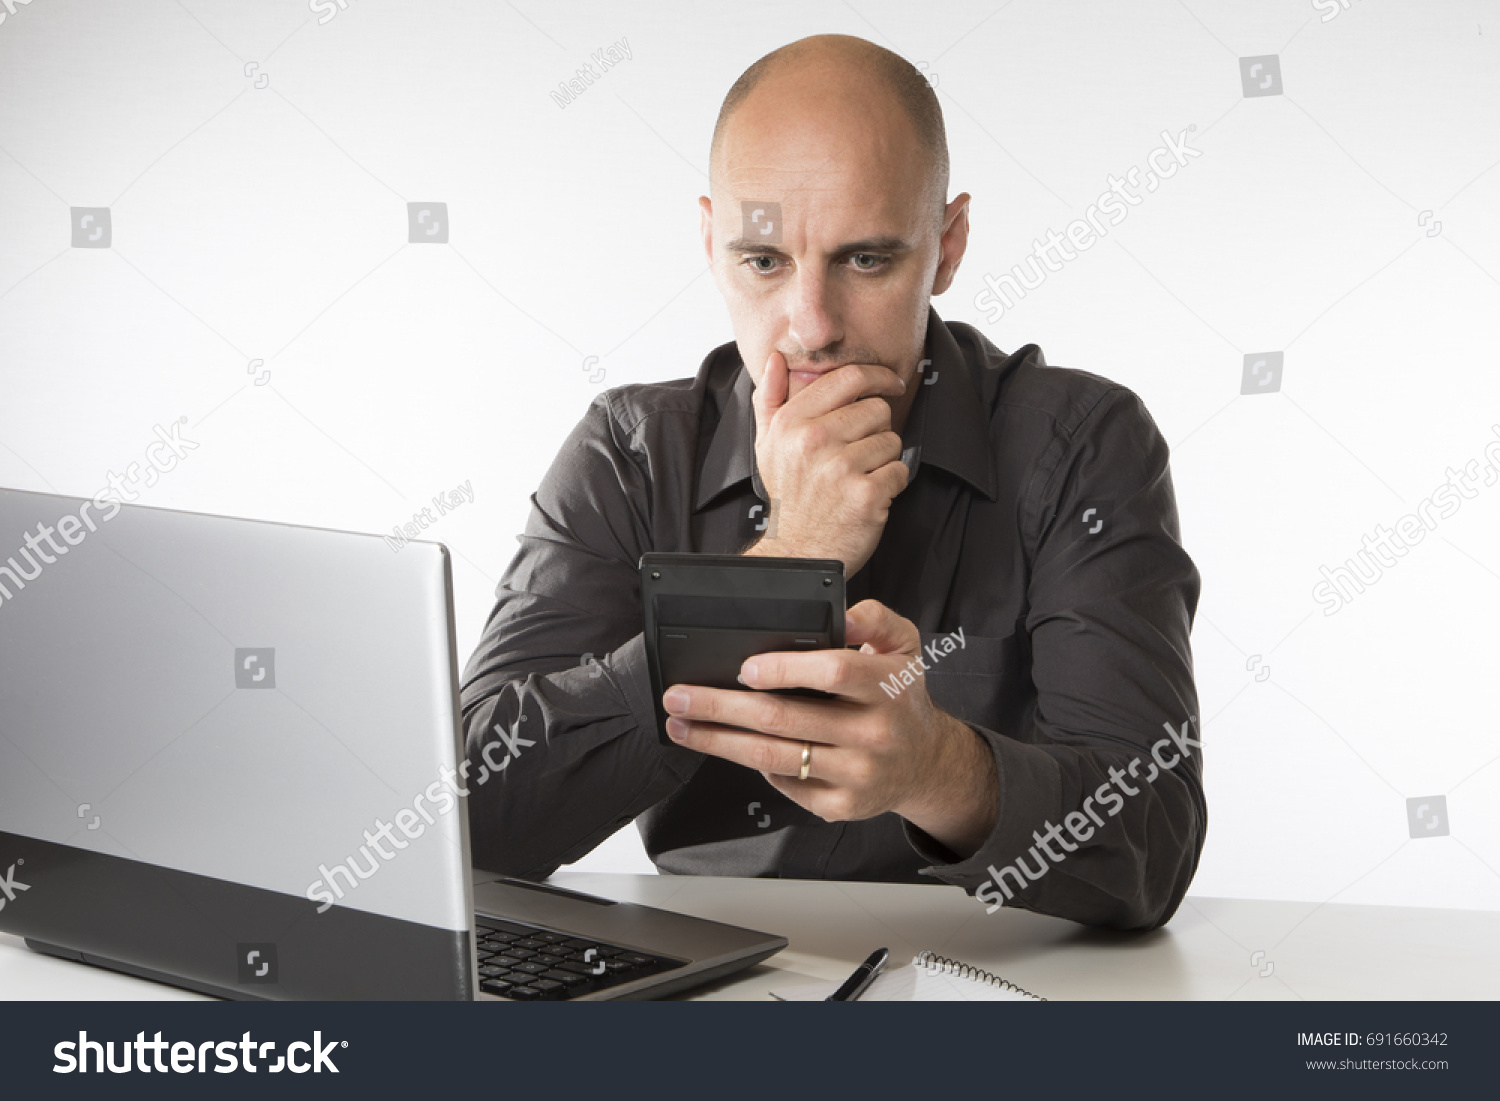 Worried man staring at a handheld calculator as he sits at his desk working on a laptop computer #691660342